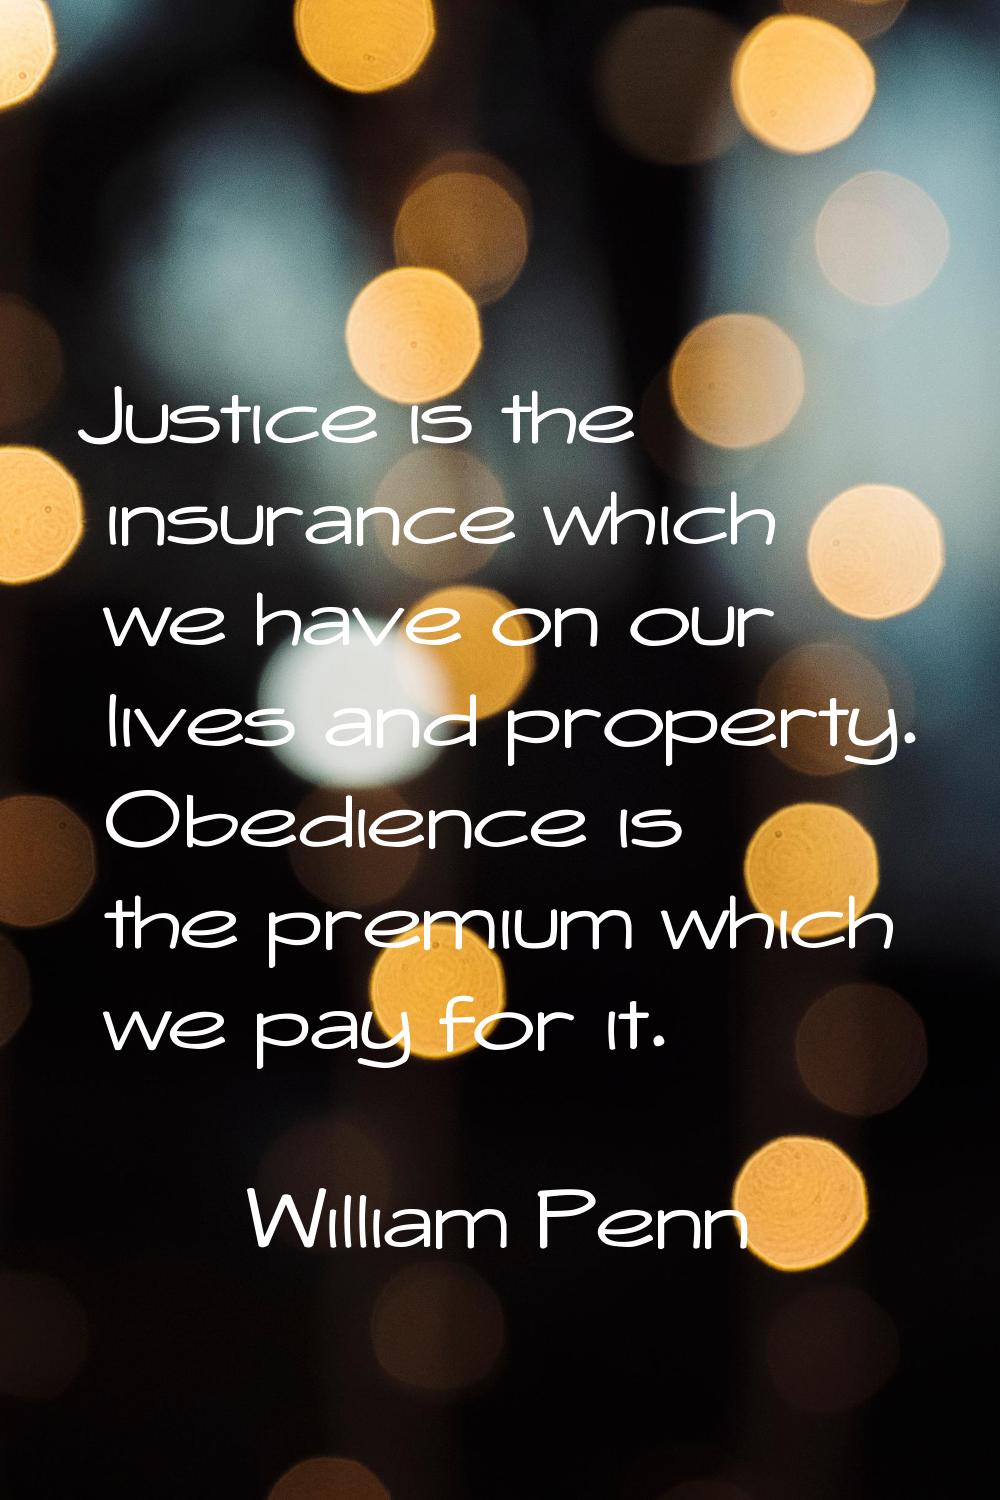 Justice is the insurance which we have on our lives and property. Obedience is the premium which we